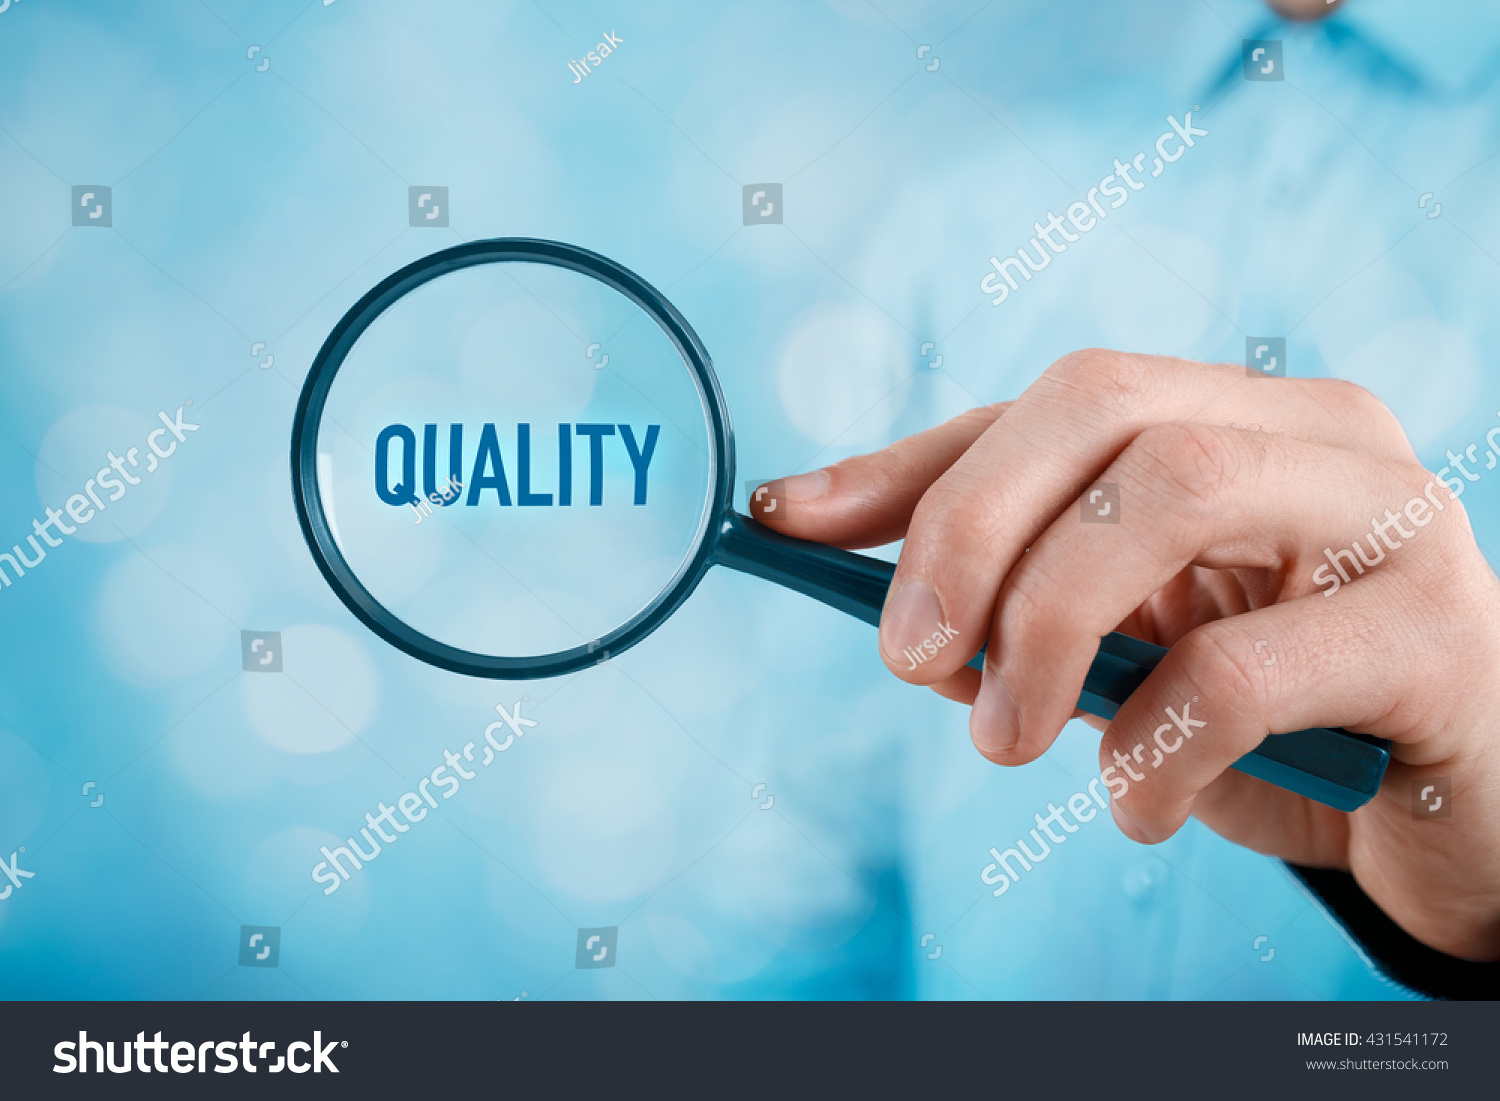 Focused on quality concept. Quality manager (businessman, coach, leadership) is focused on quality in business (total quality management concept). #431541172